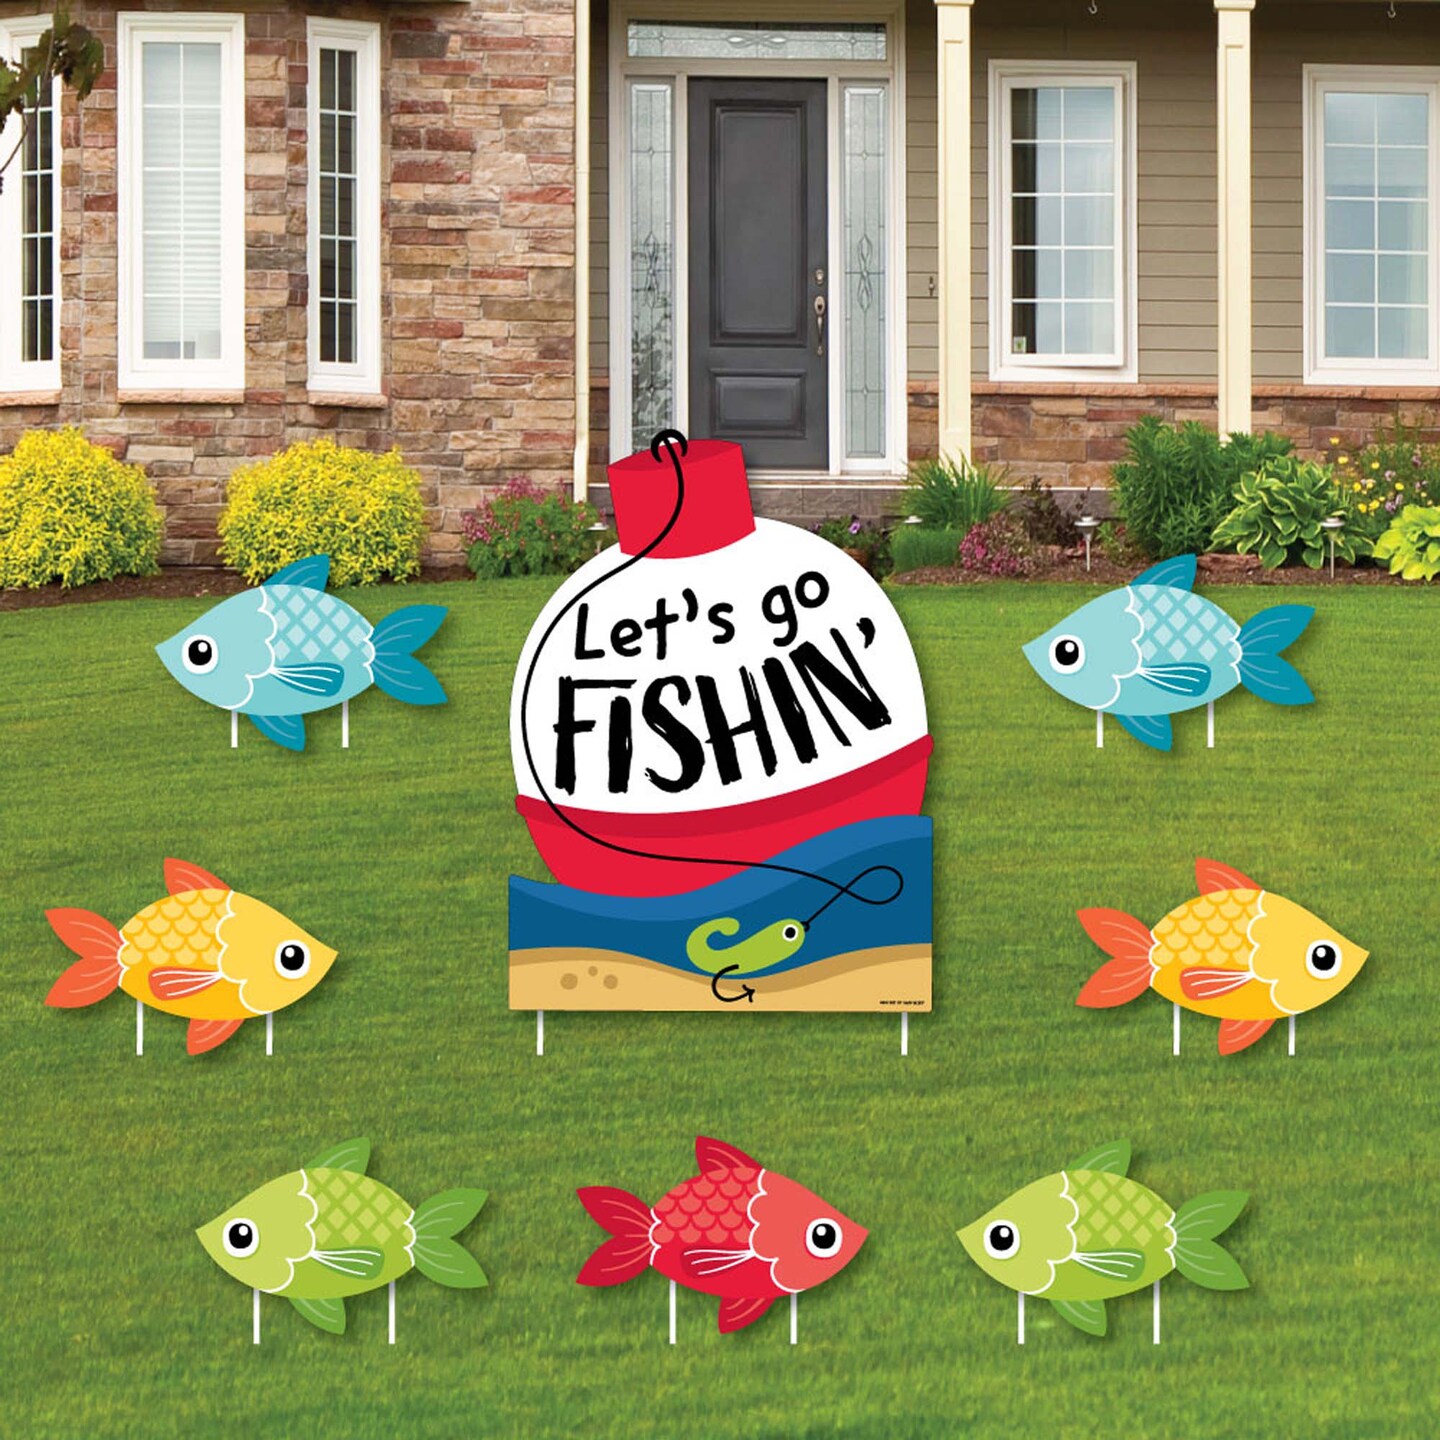 Big Dot of Happiness Let&#x27;s Go Fishing - Yard Sign and Outdoor Lawn Decorations - Fish Themed Birthday Party or Baby Shower Yard Signs - Set of 8